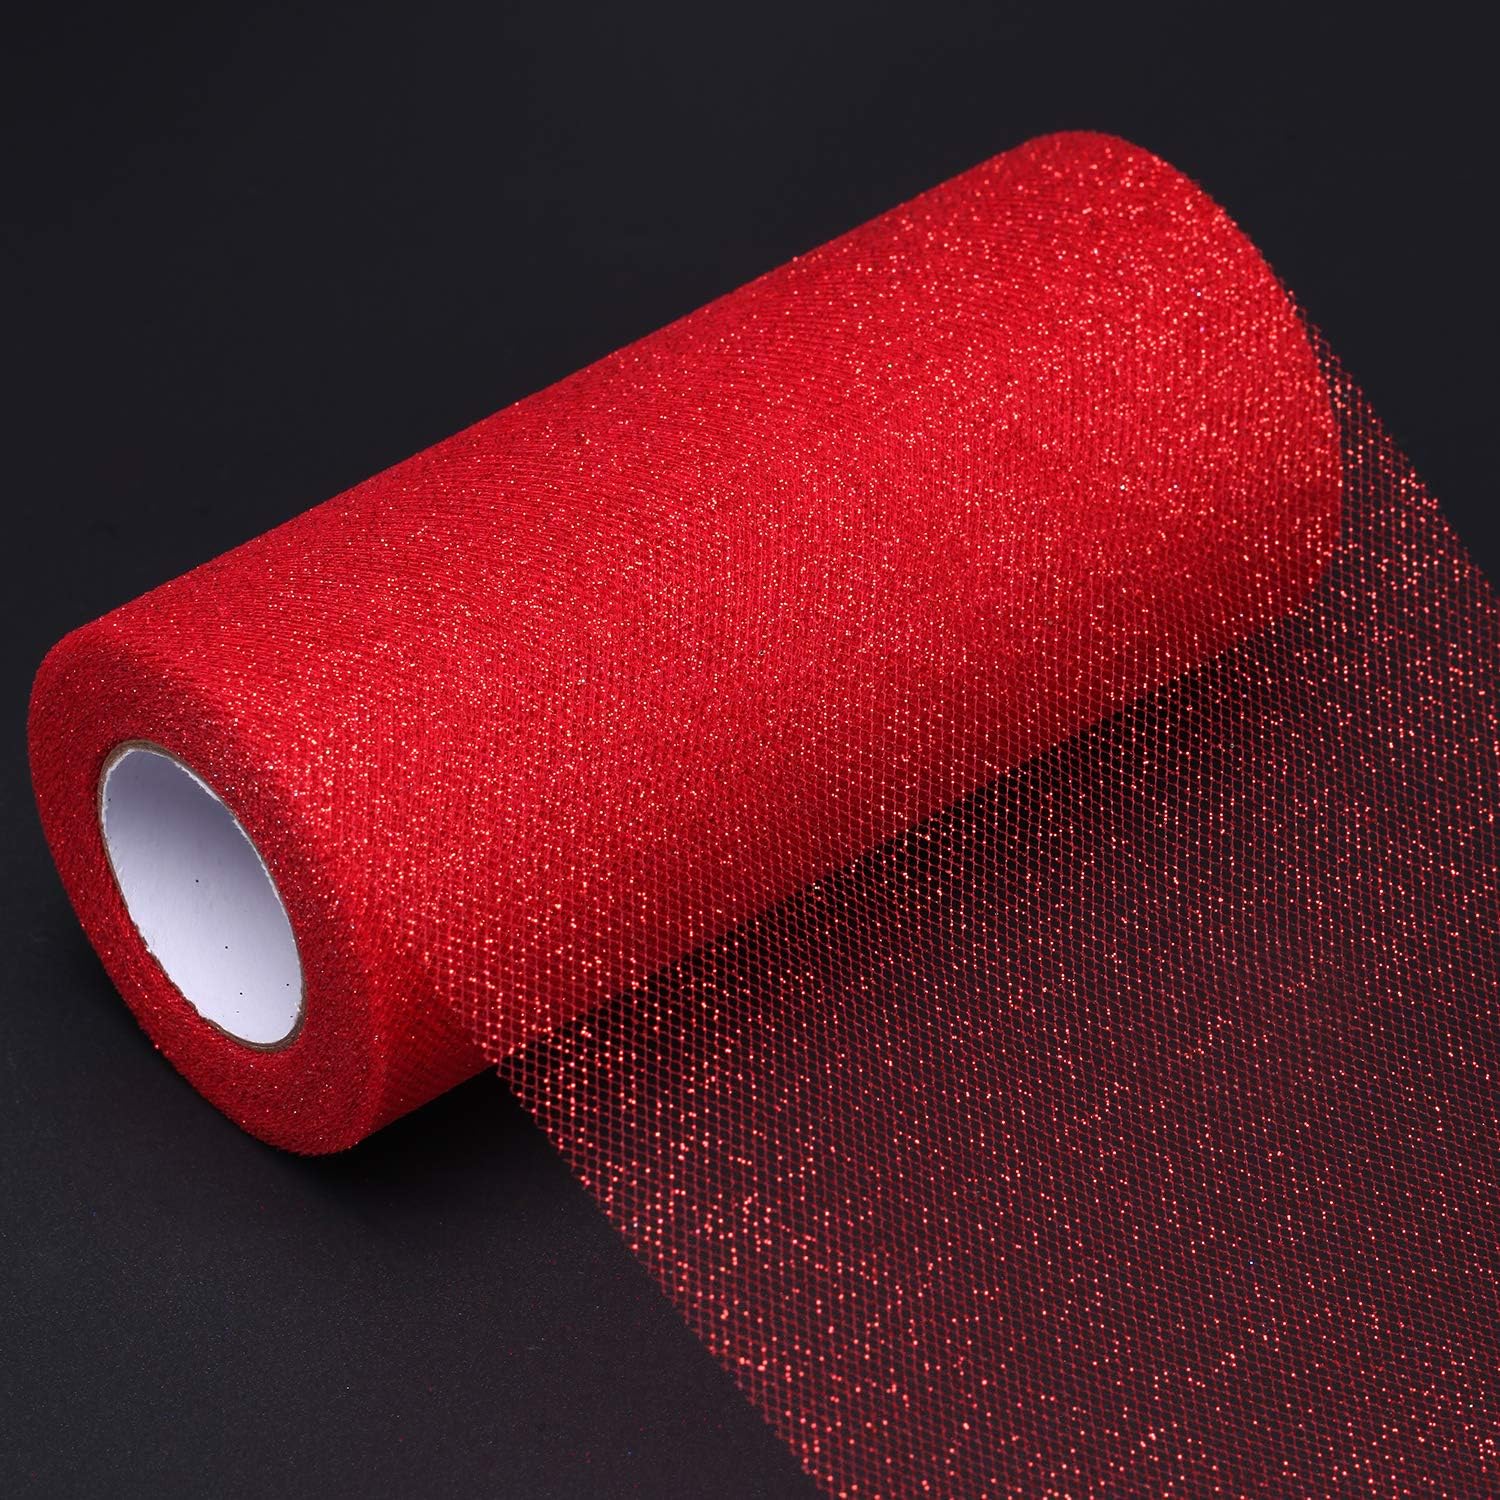 China Factory Nylon Tulle Fabric Rolls, Mesh Ribbon Spool, for Christmas  Wedding and Decoration 5-7/8 inch(150mm), about 24.06 Yards(22m)/Roll in  bulk online 